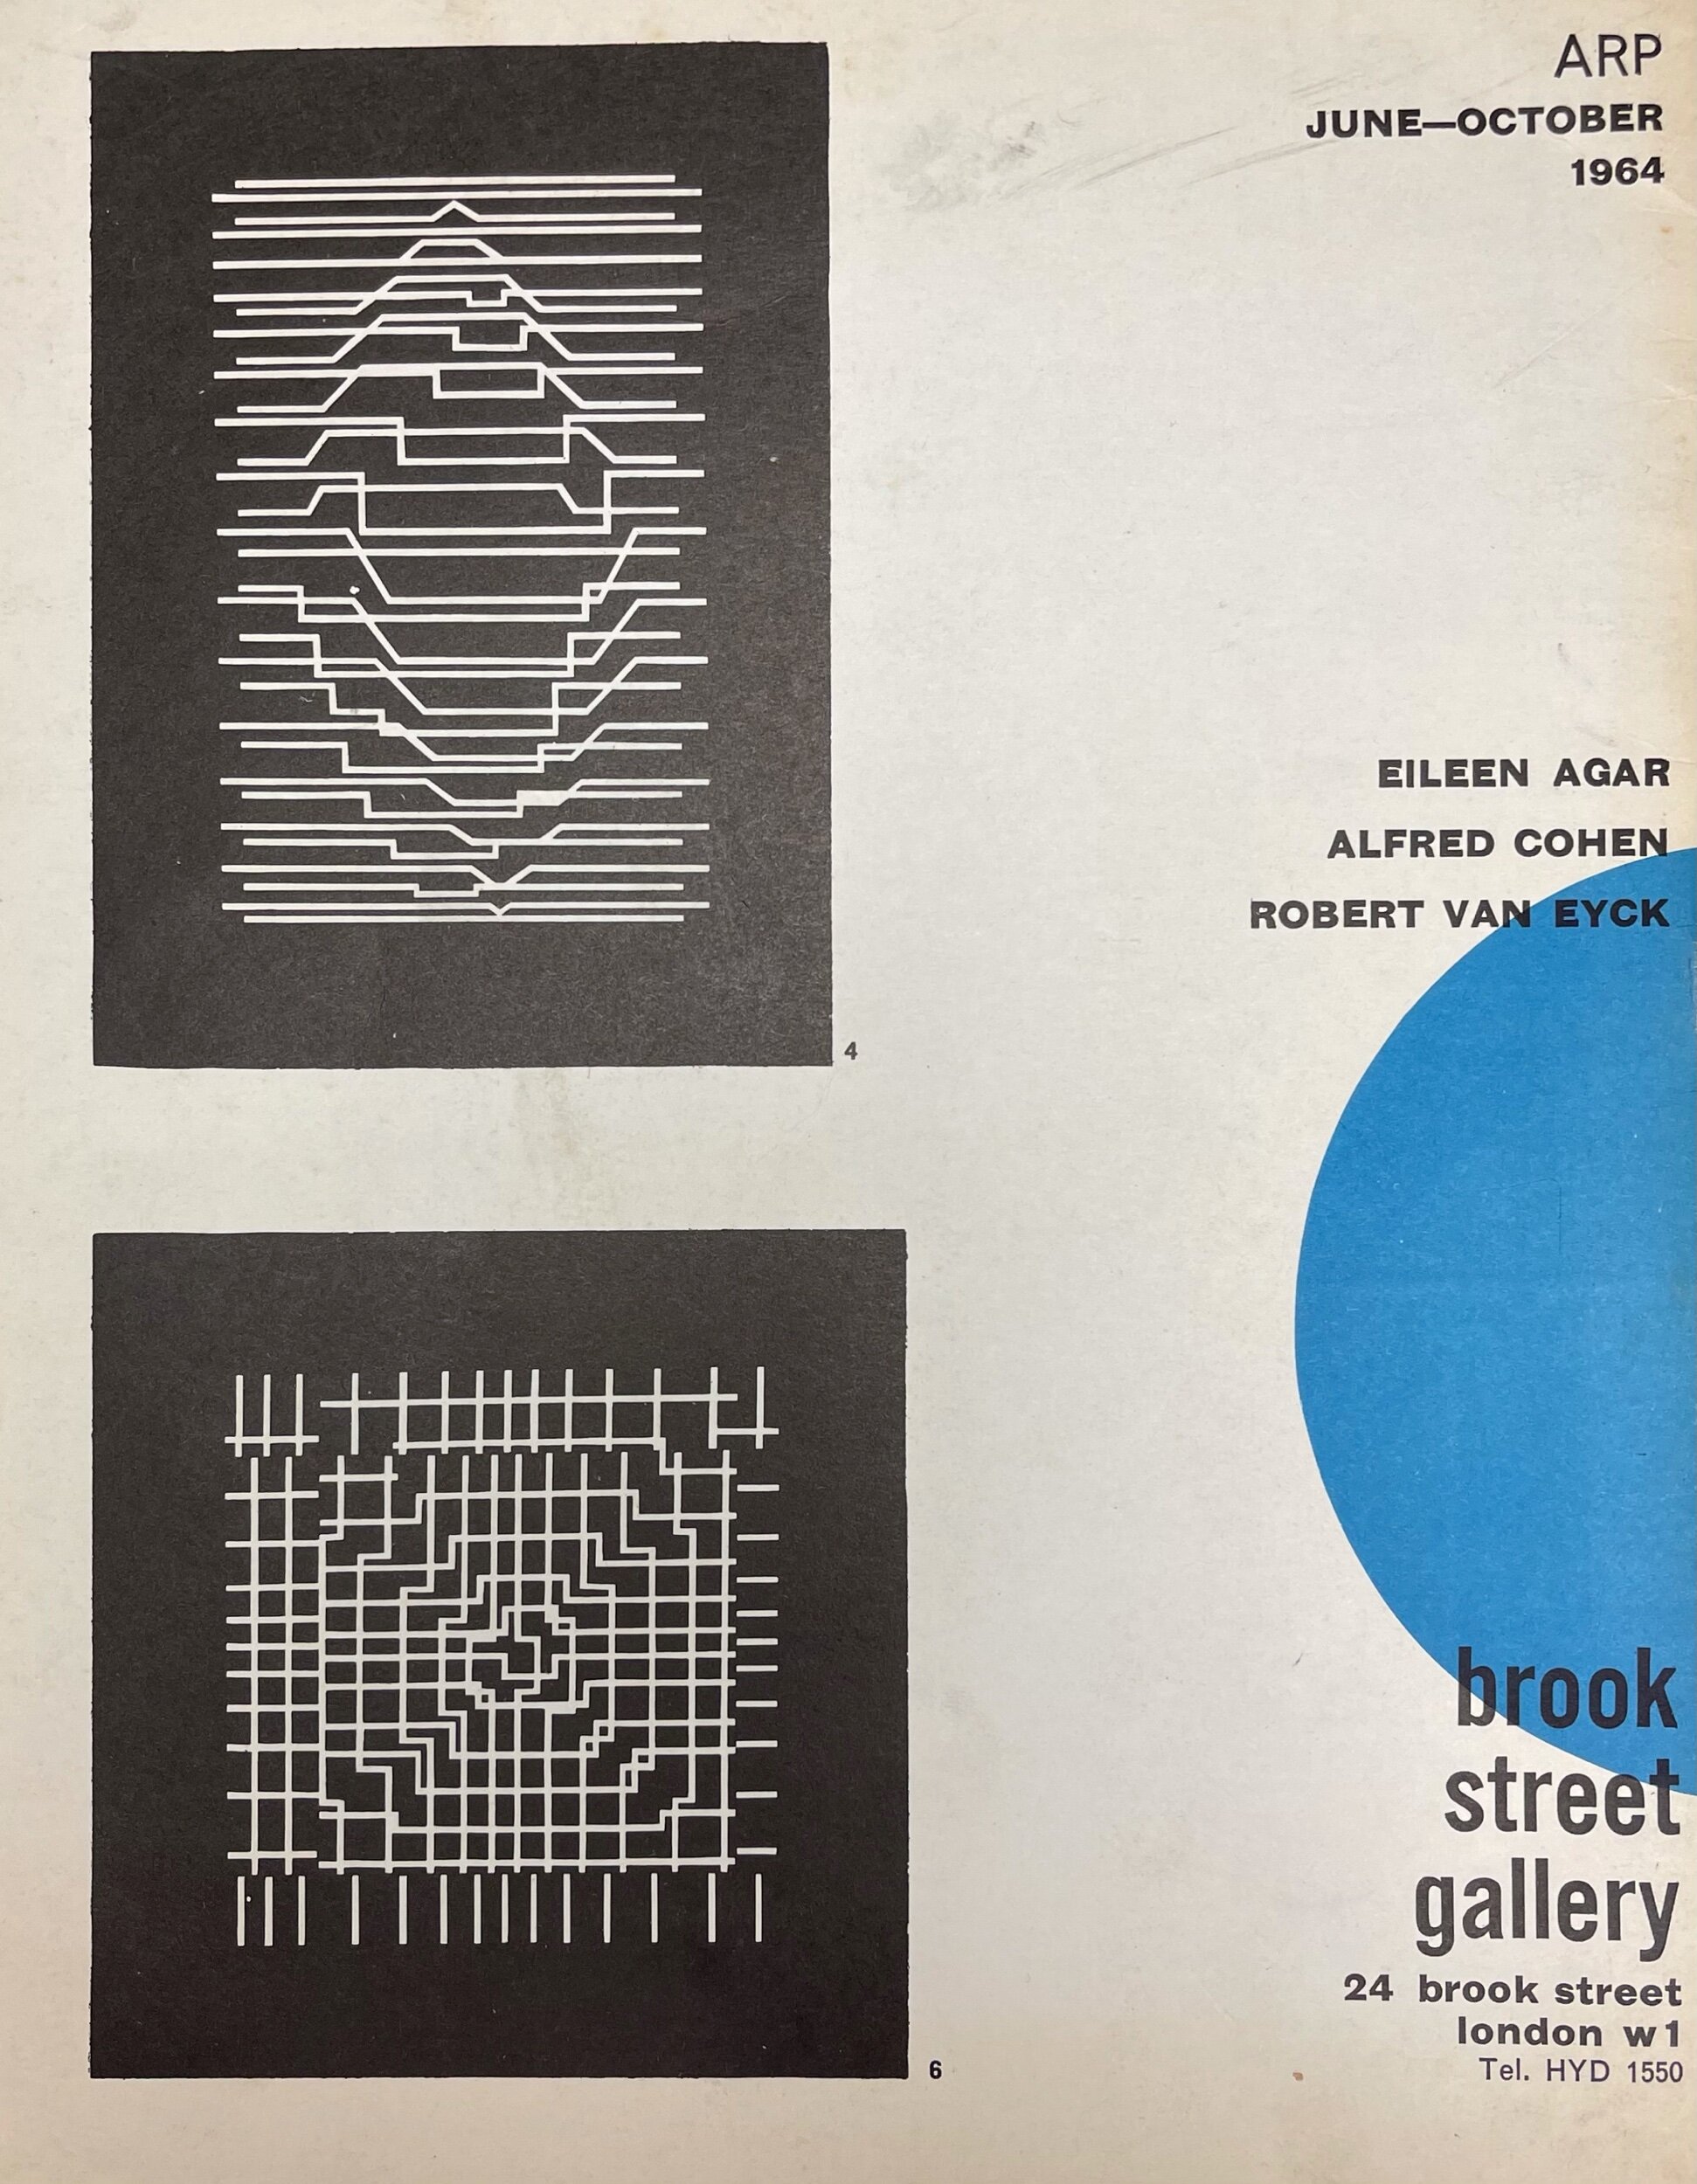 Back cover of Vasarely’s catalogue.